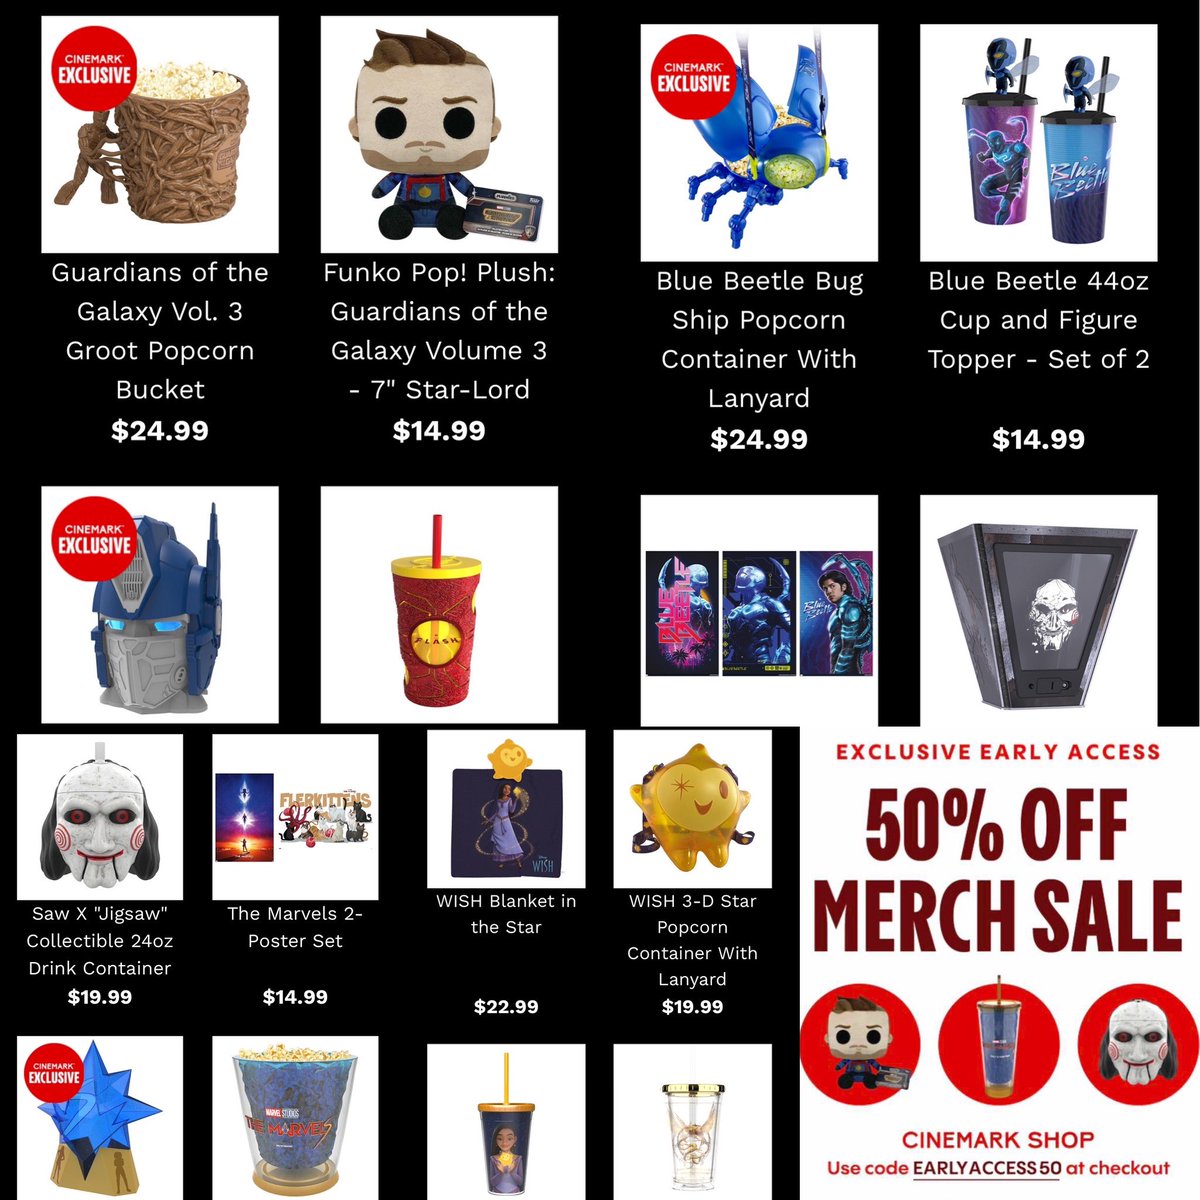 Deal 🚨- Cinemark is running a 50% off Sale on Popcorn buckets and more! Use code EARLYACCESS50 at checkout. . shopcinemark.com/cat-56-2-120/2… . #Cinemark #Popcorn #Collectibles #DisTrackers